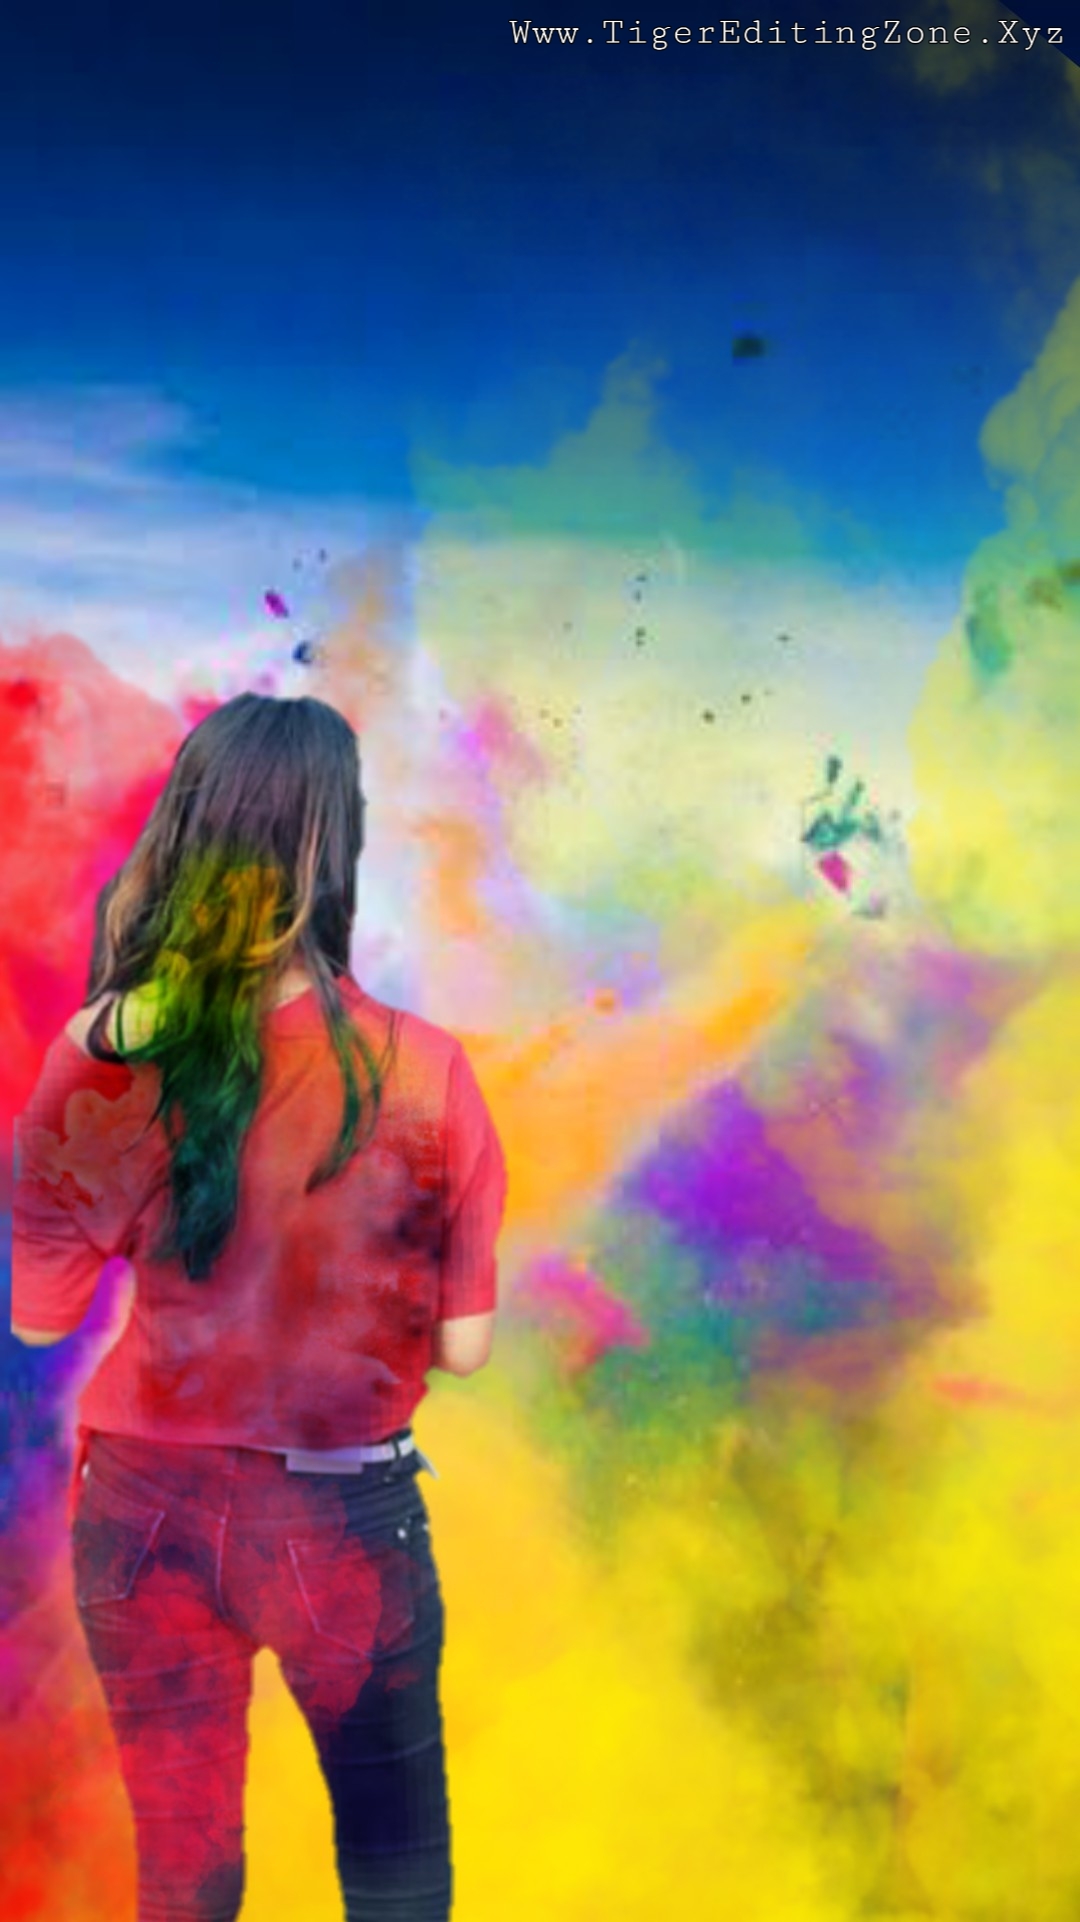 100+ Best Happy Holi Background Images HD for PicsArt | Happy Holi Photo Editing Background 2021